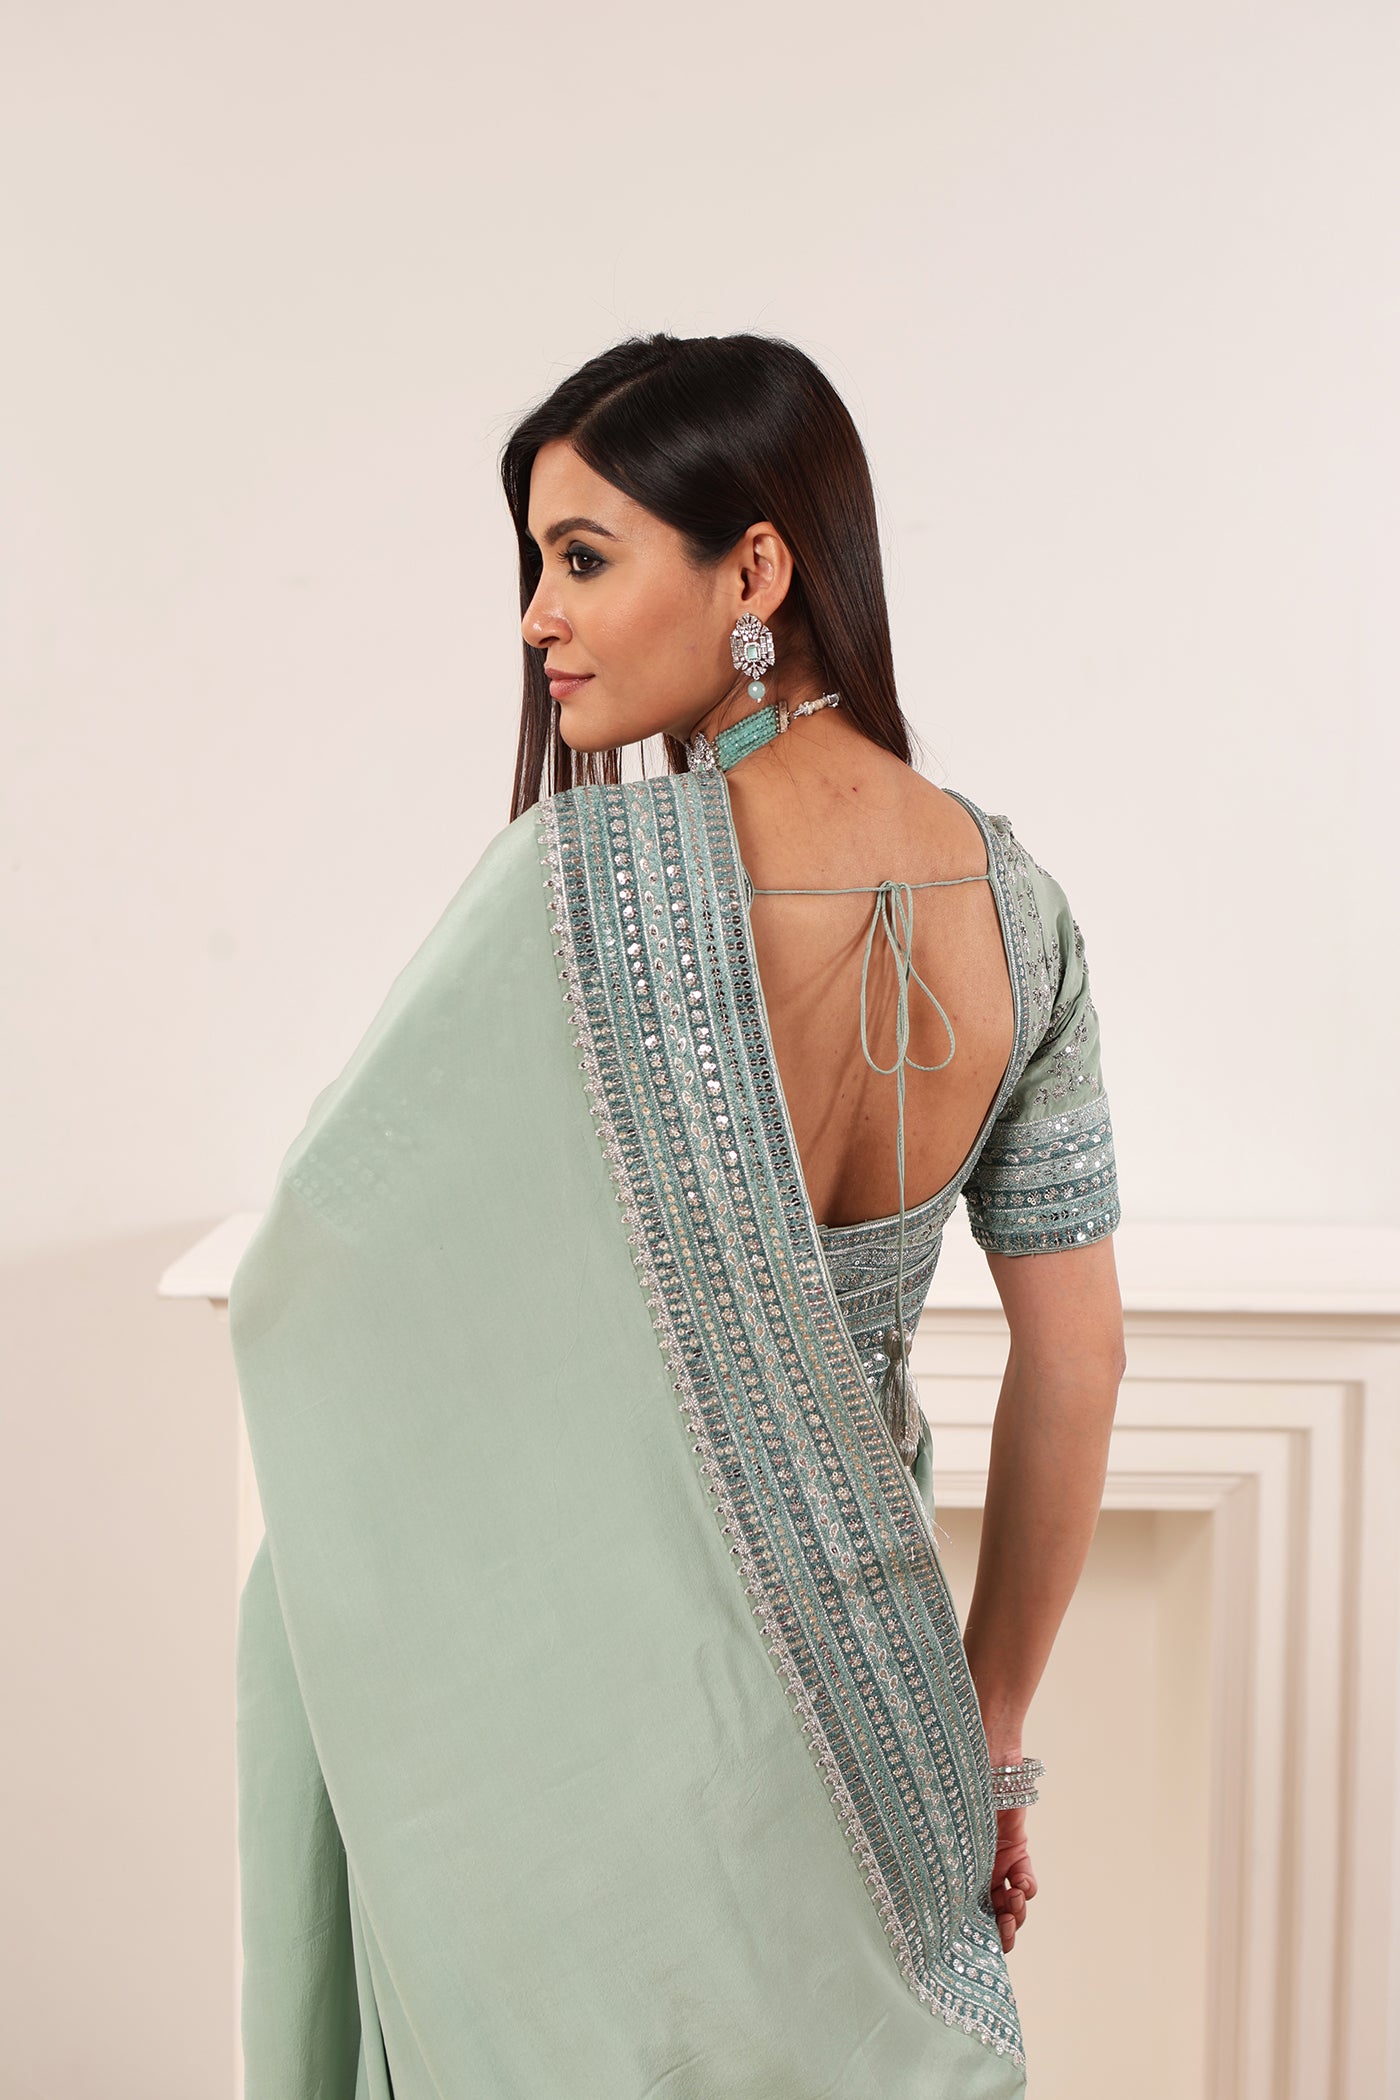 Sage-Green Embroidered Pure Crepe-Silk Saree-Blouse Set